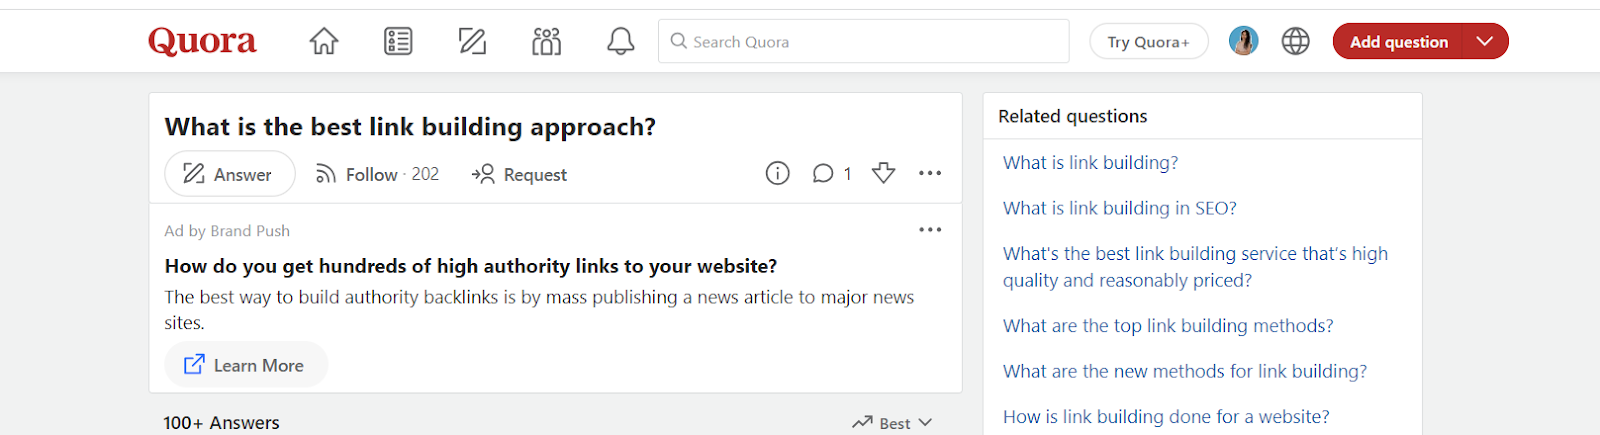 using Quora to find new content ideas for your blog.